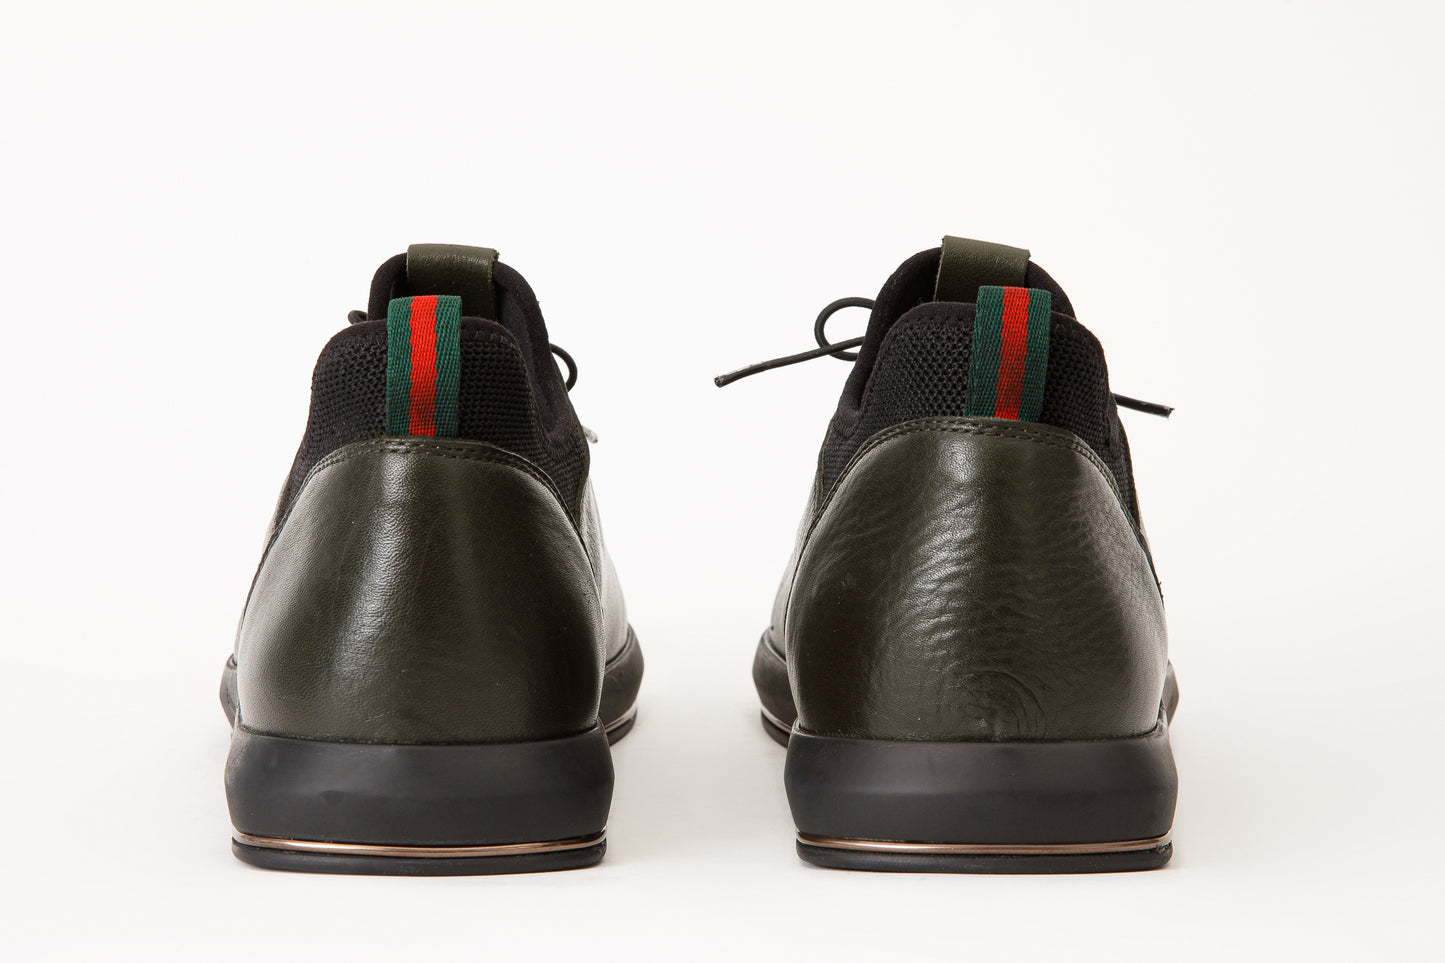 The Hoxton Green Leather Men Sneaker